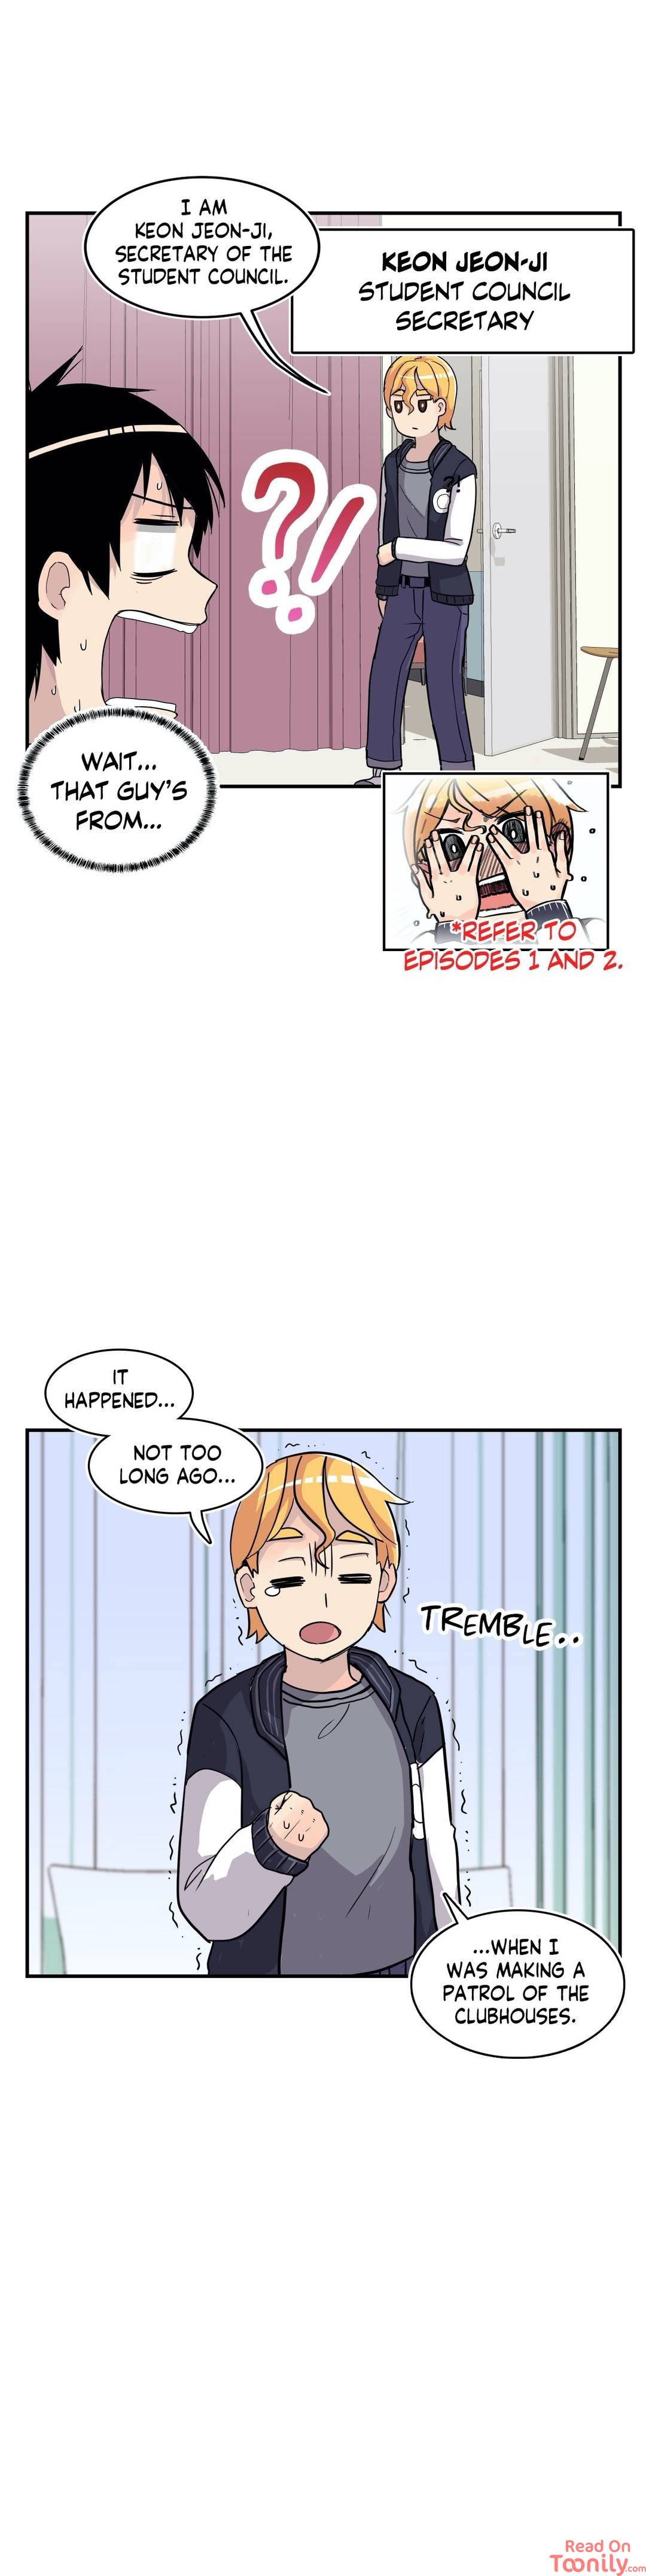 Rom-comixxx! - Chapter 5 Page 20